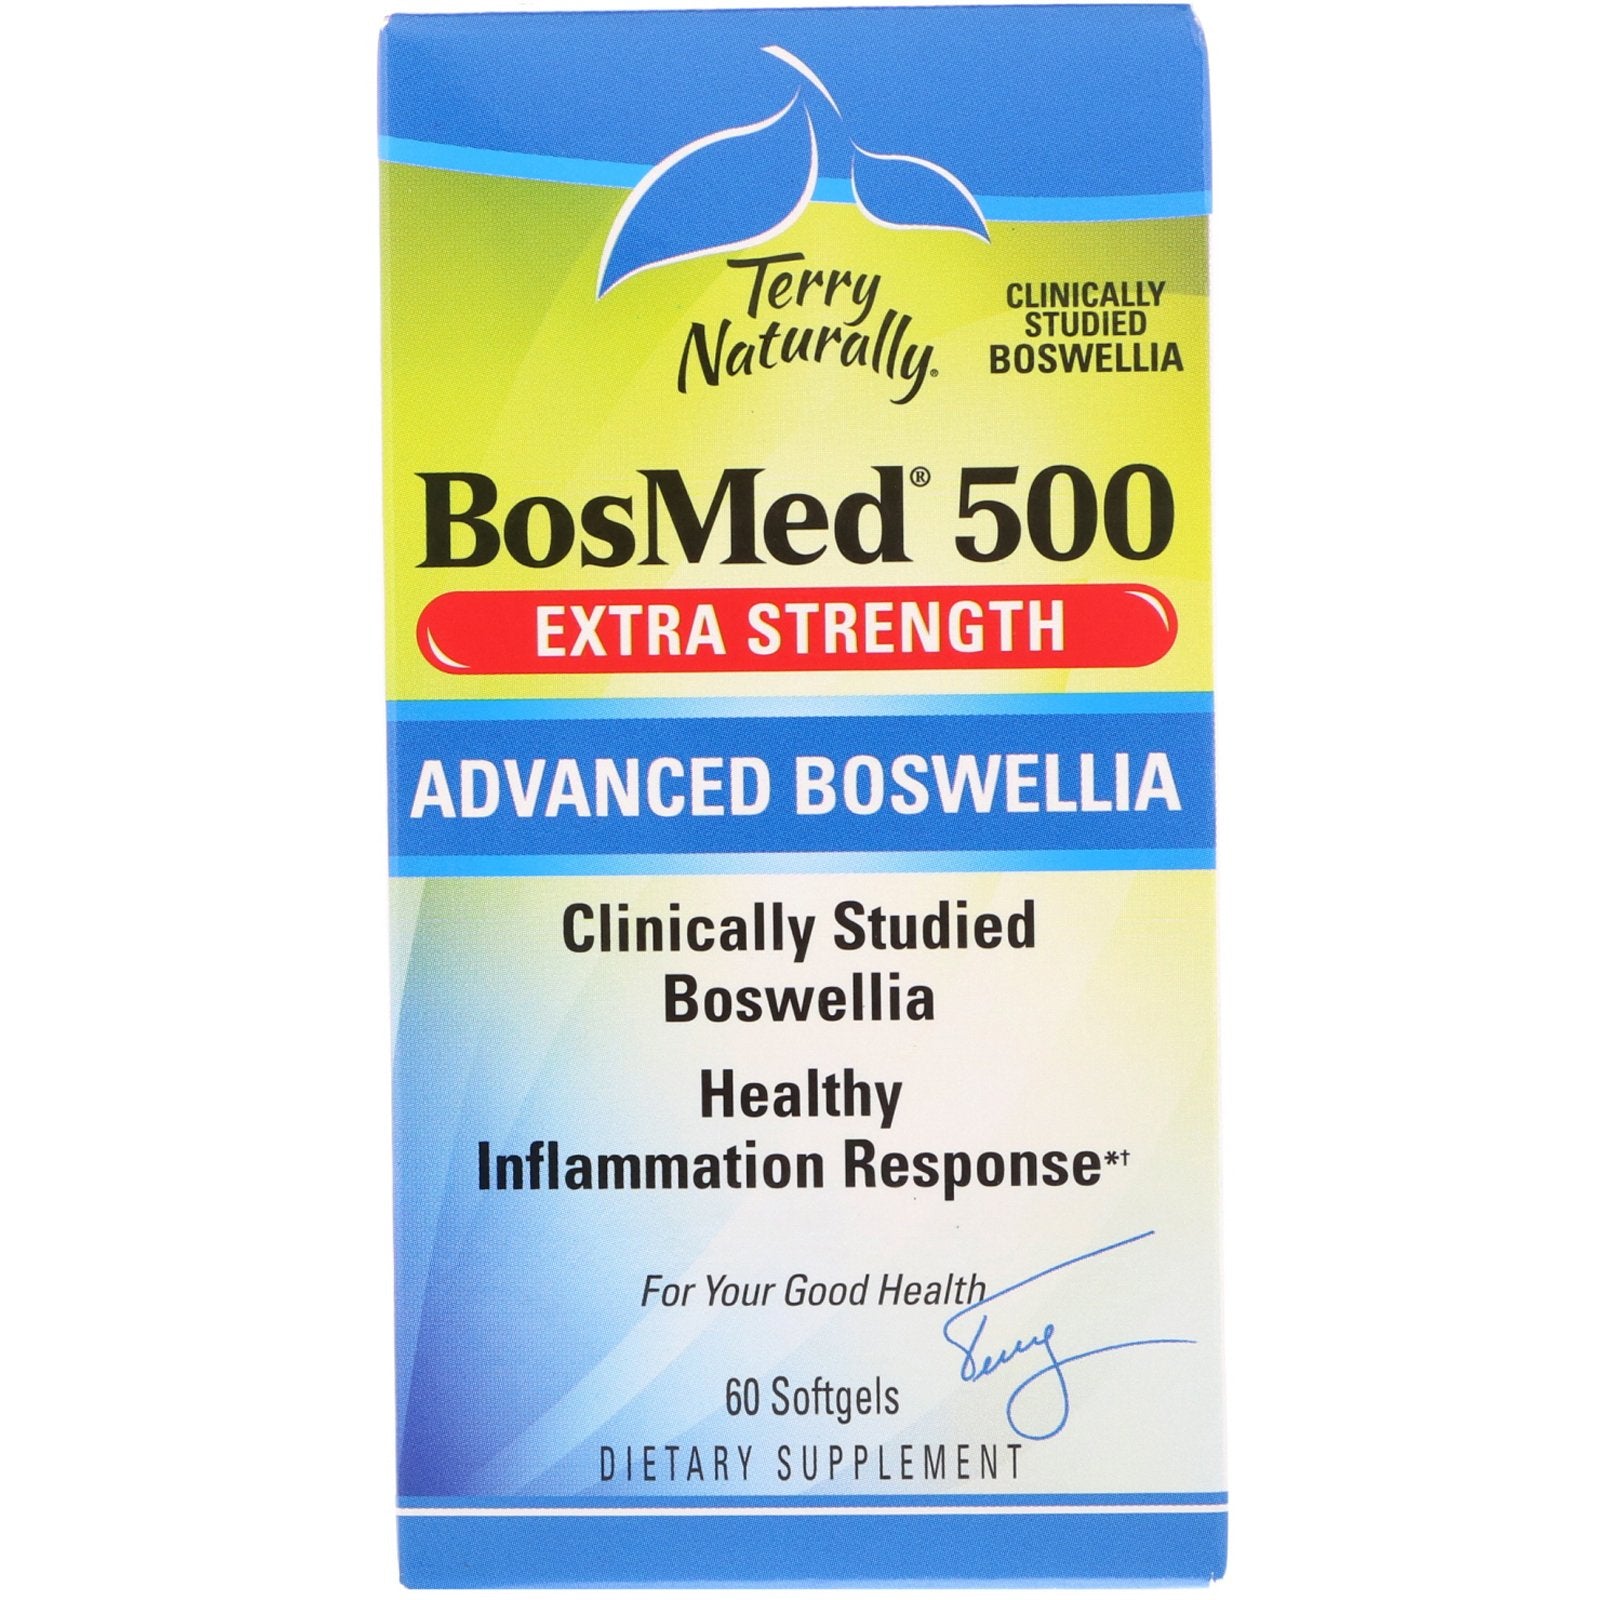 Terry Naturally, BosMed 500, Extra Strength, Advanced Boswellia, 500 mg, 60 Softgels